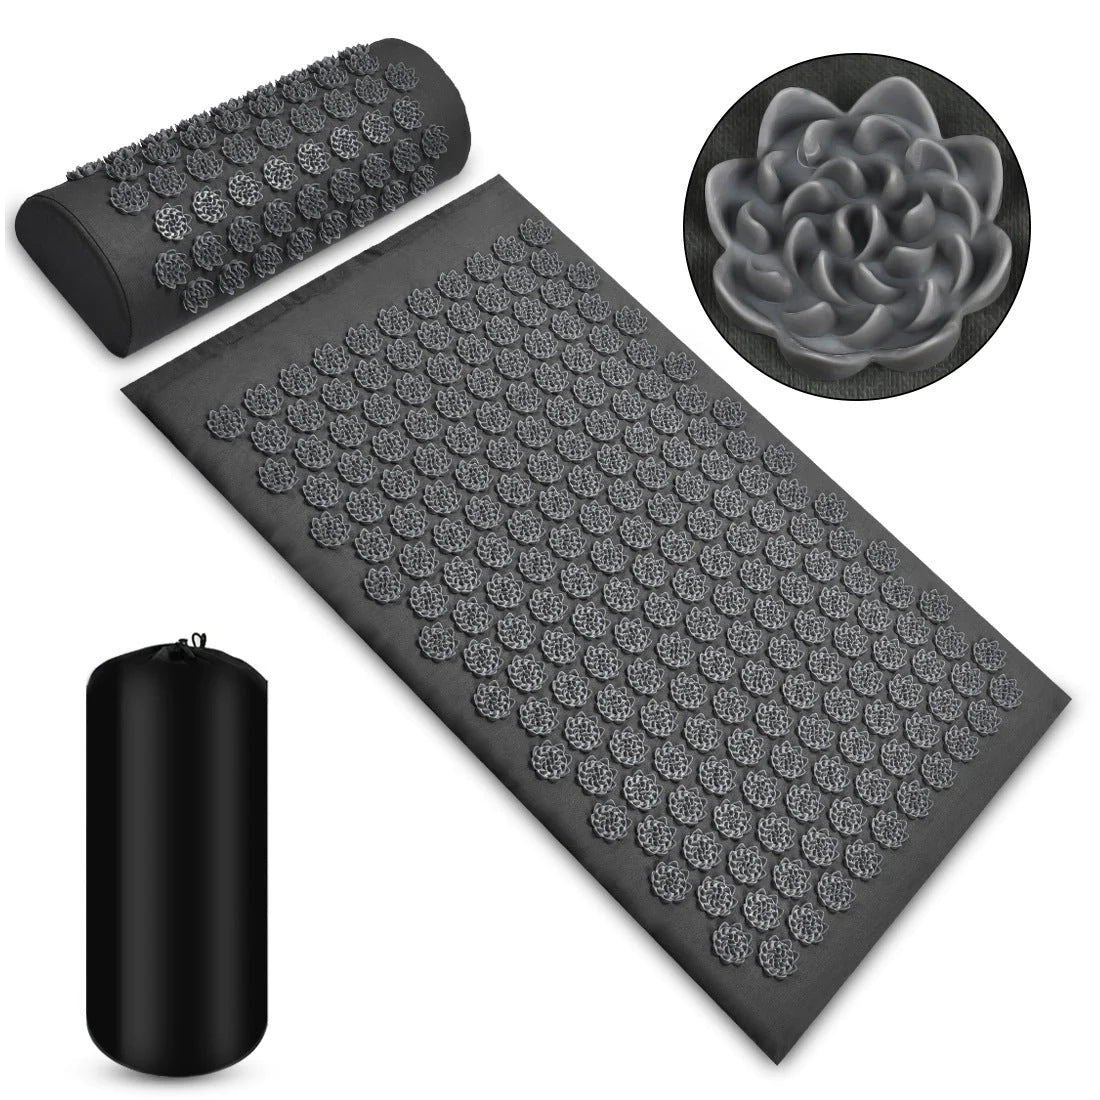 Acupressure Yoga Mat with Massage Points by Lotus